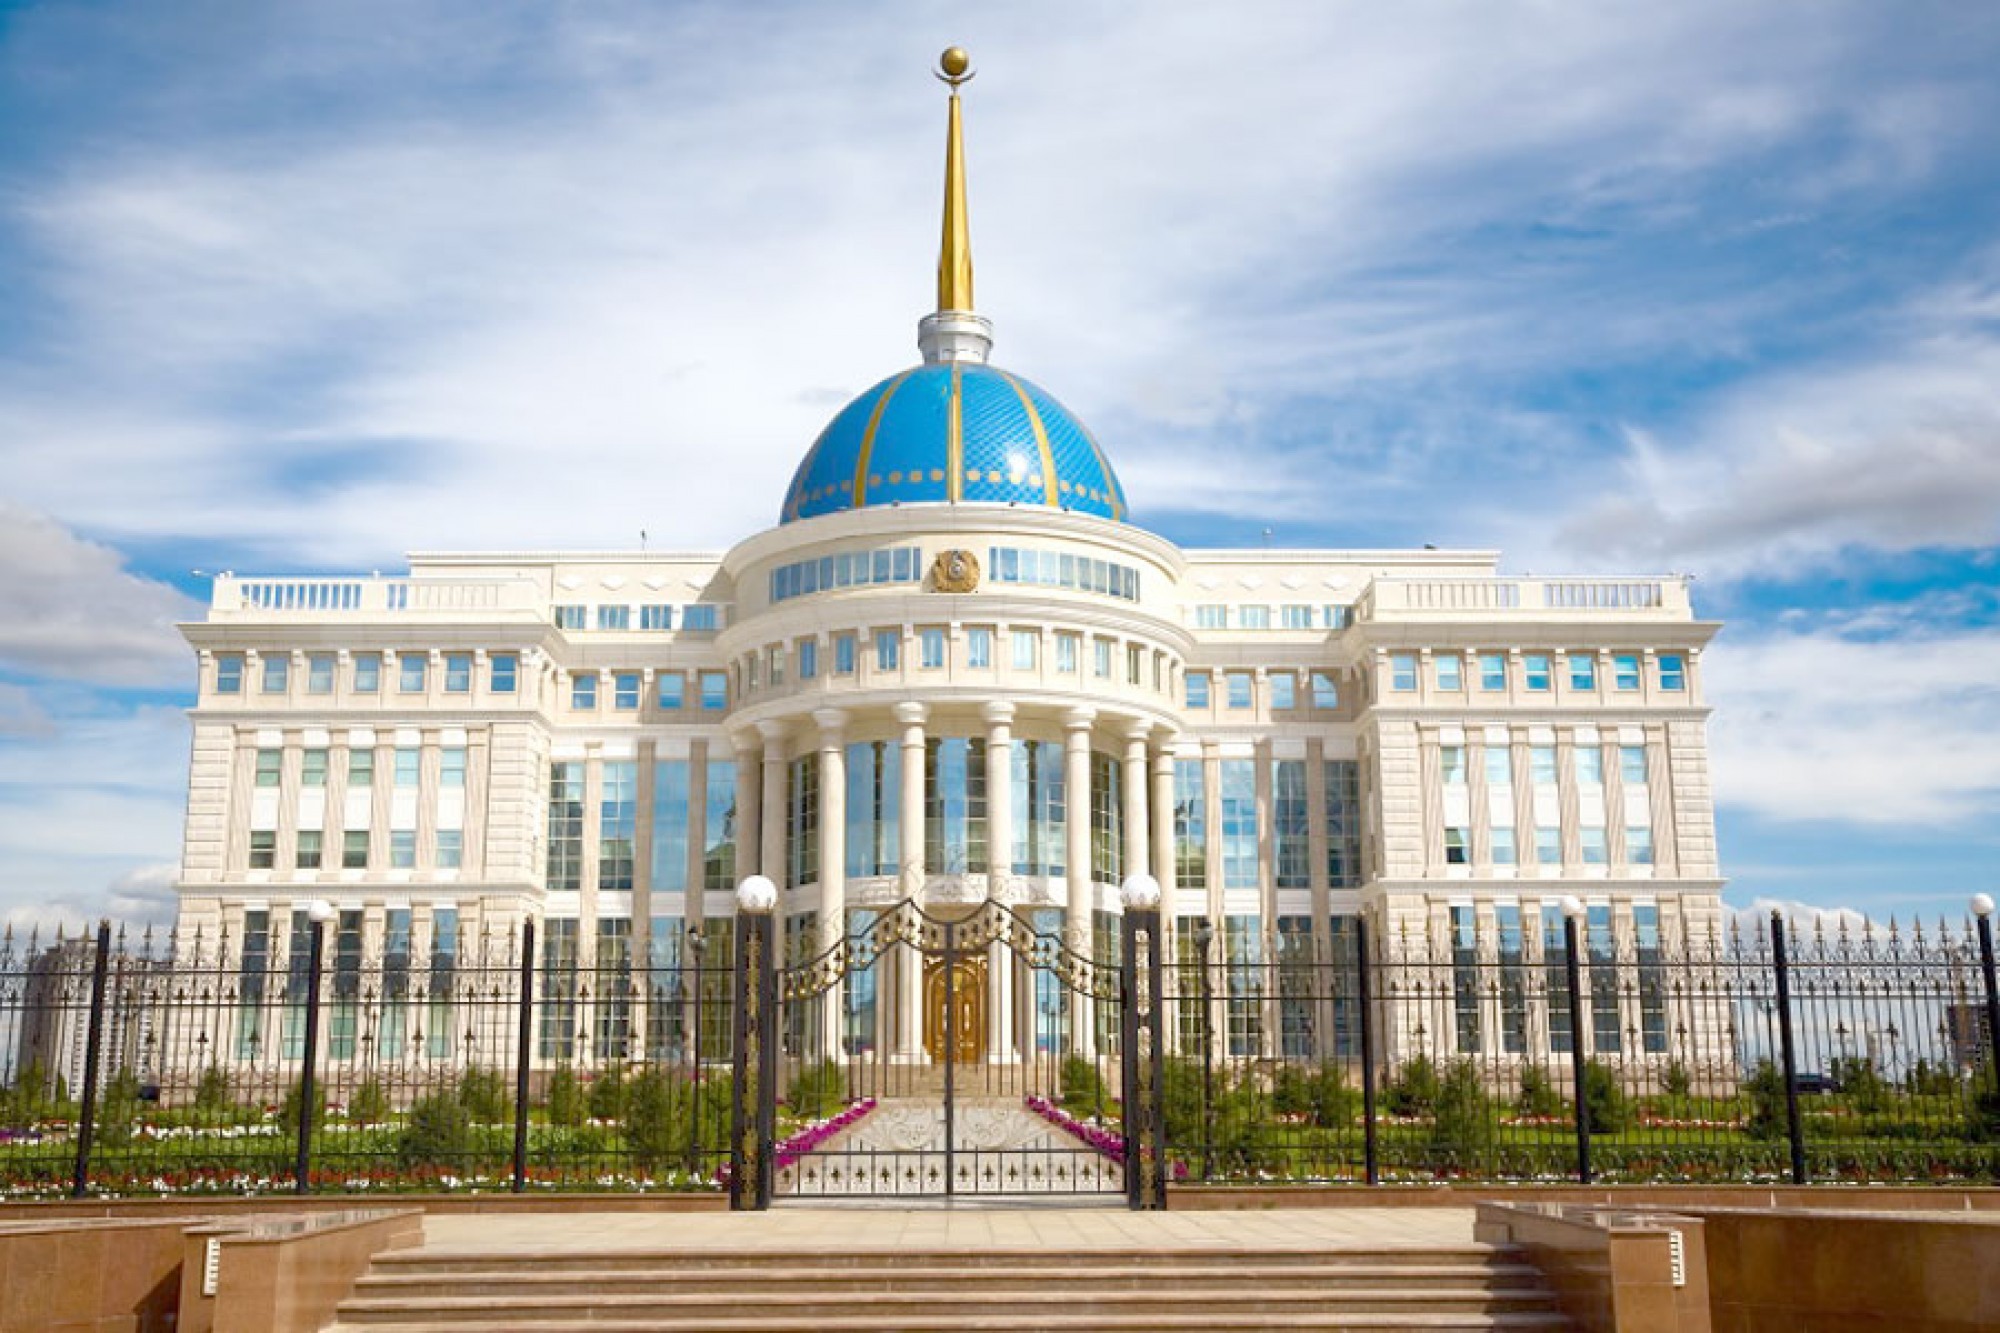 Kazakh President expressed his condolences in connection with the plane crash in Iran